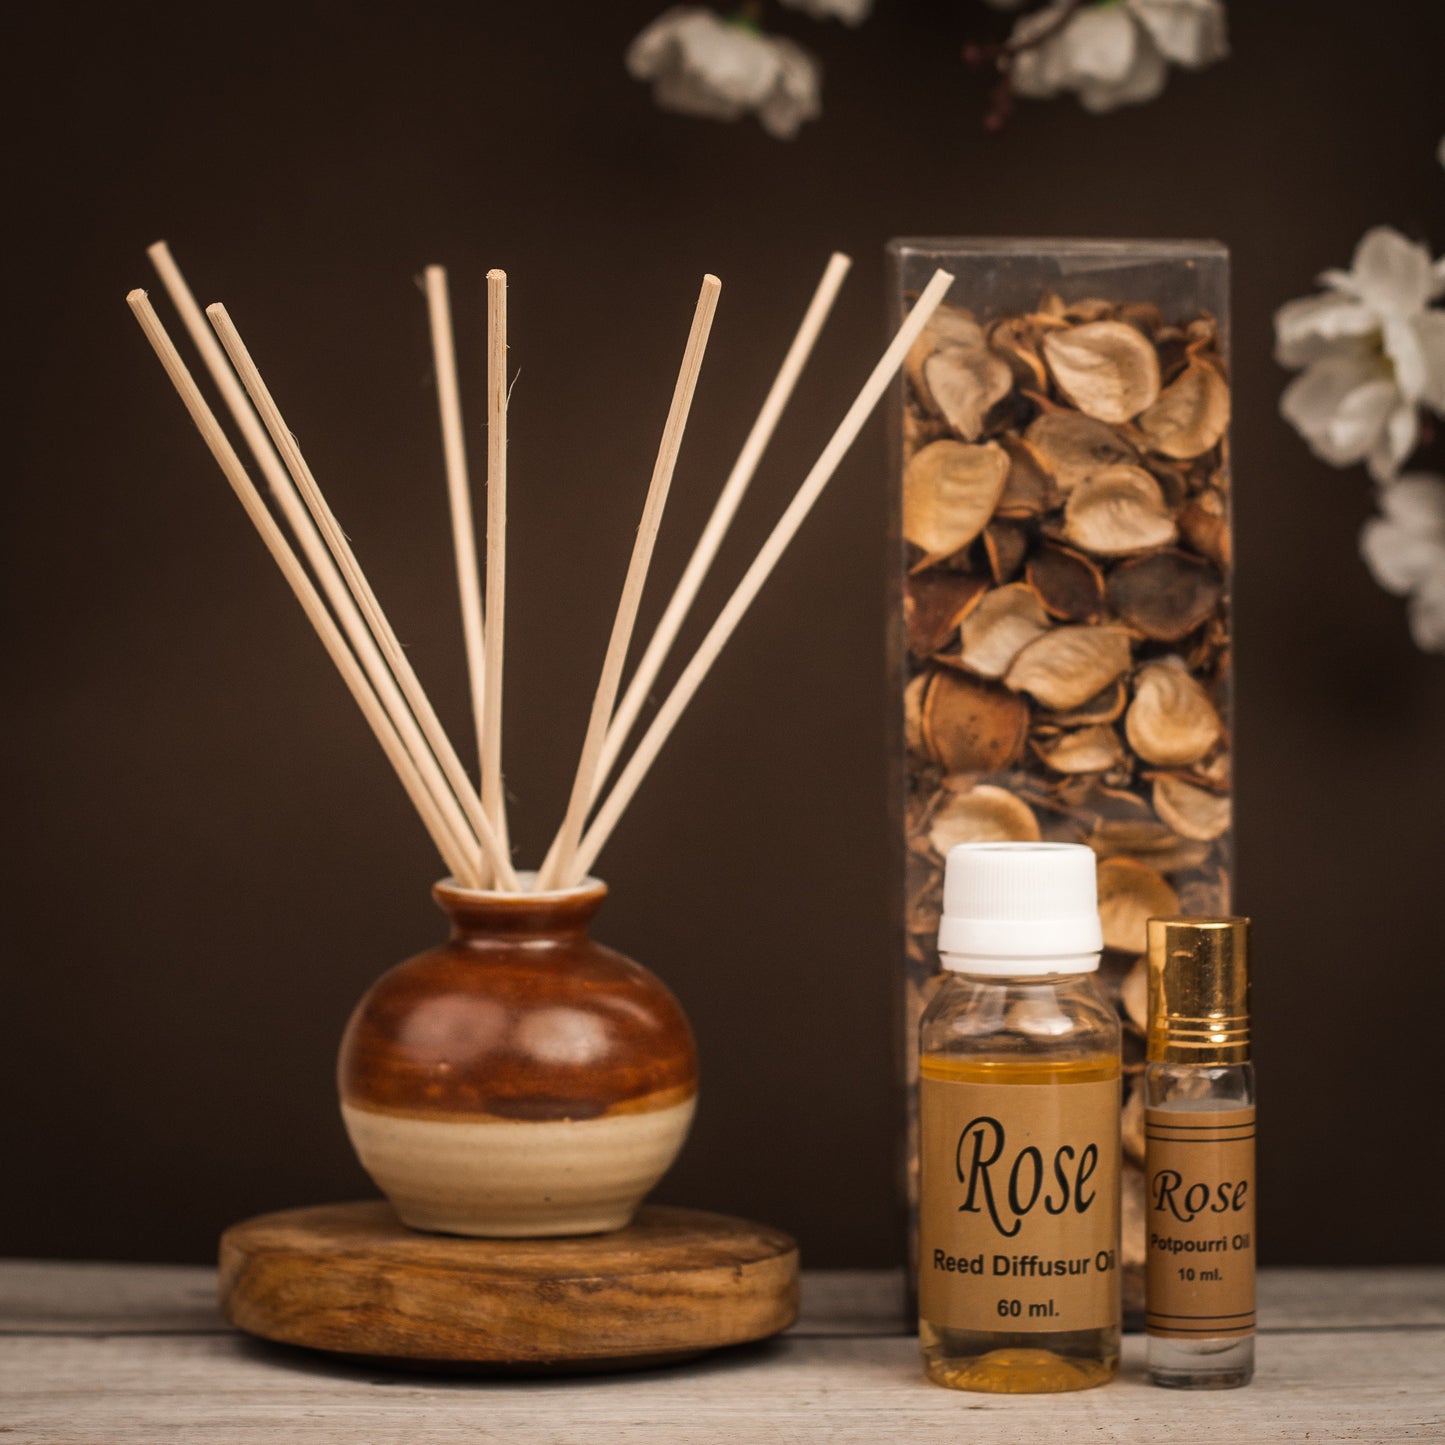 Auradecor Reed Diffuser Gift Set with Potpourri ( RD10)